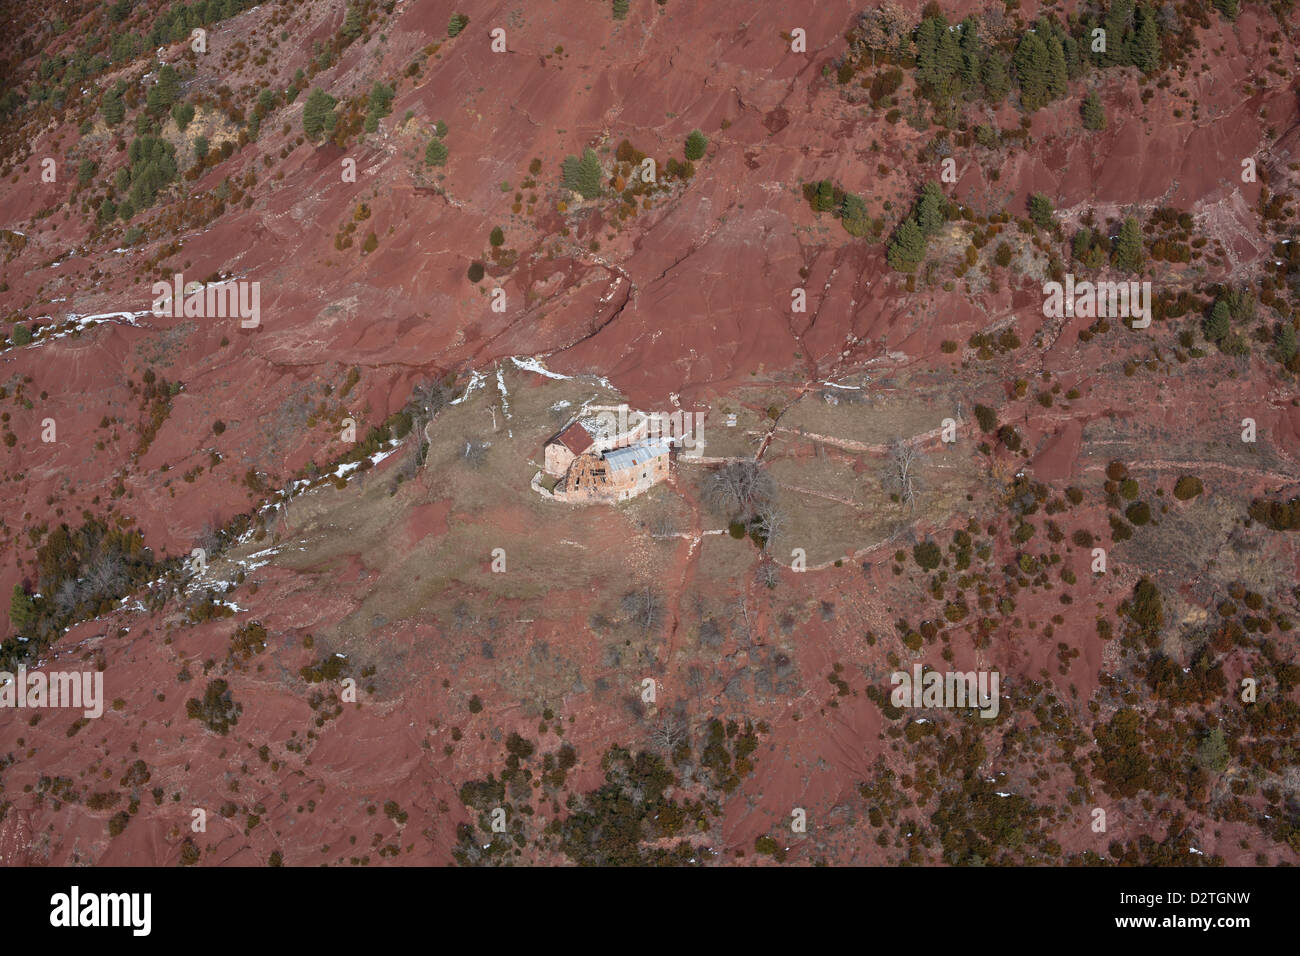 AERIAL VIEW. Abandoned copper mine. Roua, Daluis Gorge, French Riviera's backcountry, France. Stock Photo